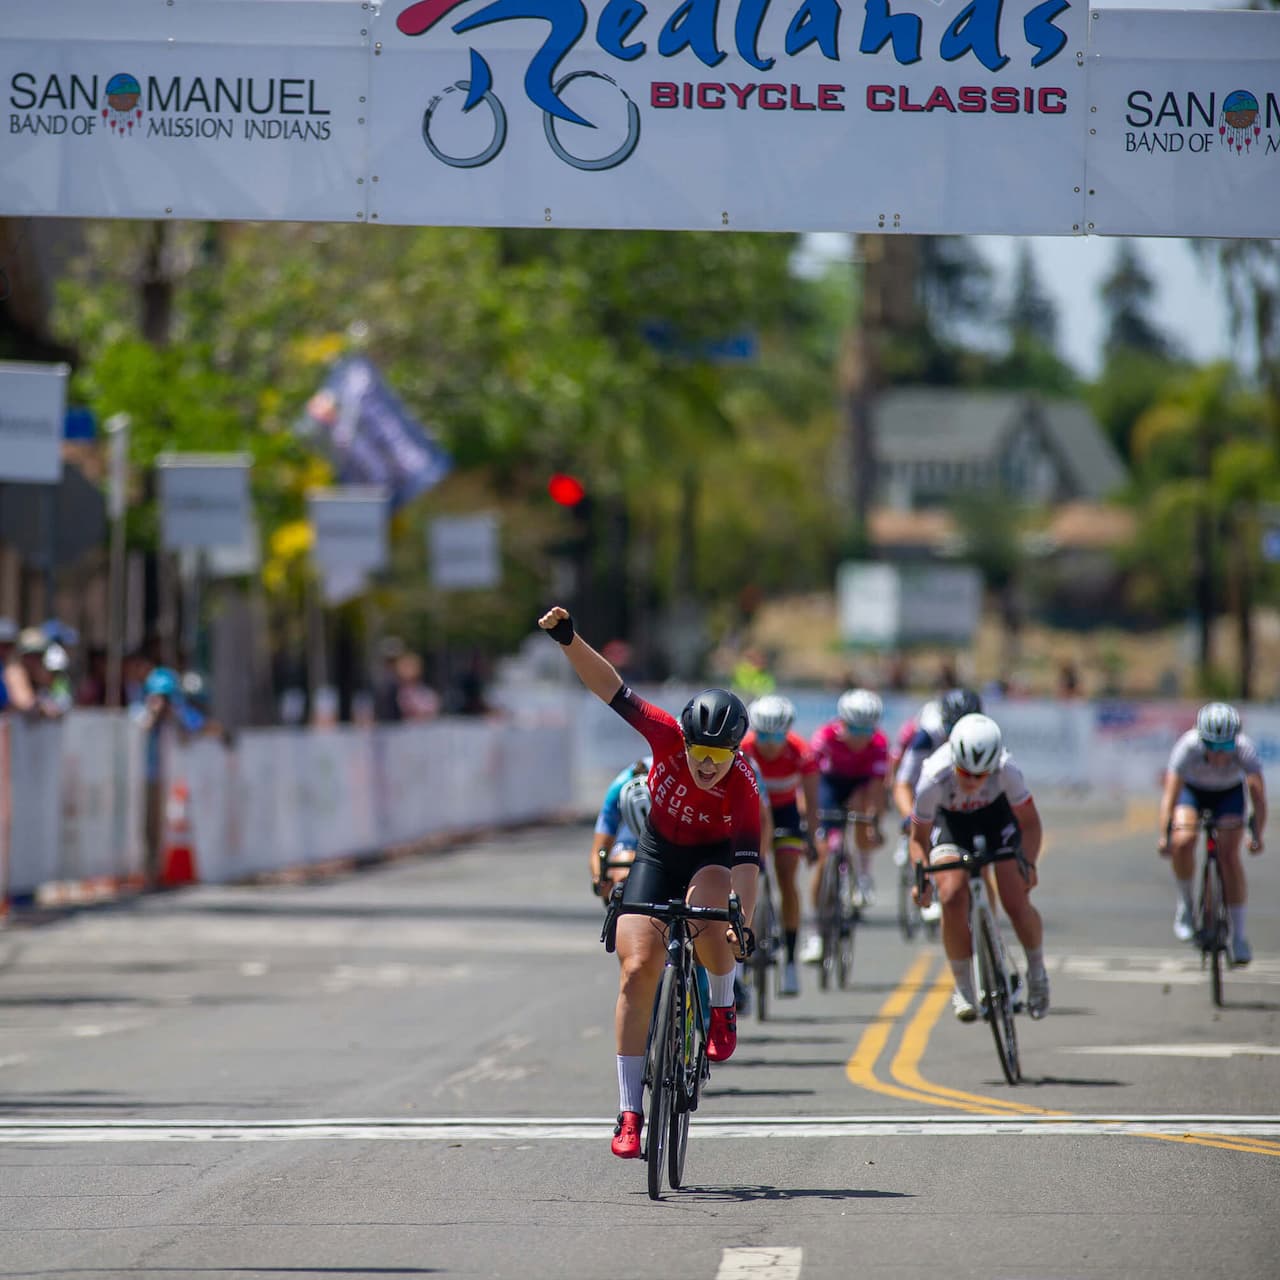 Return Of The Redlands Bicycle Classic